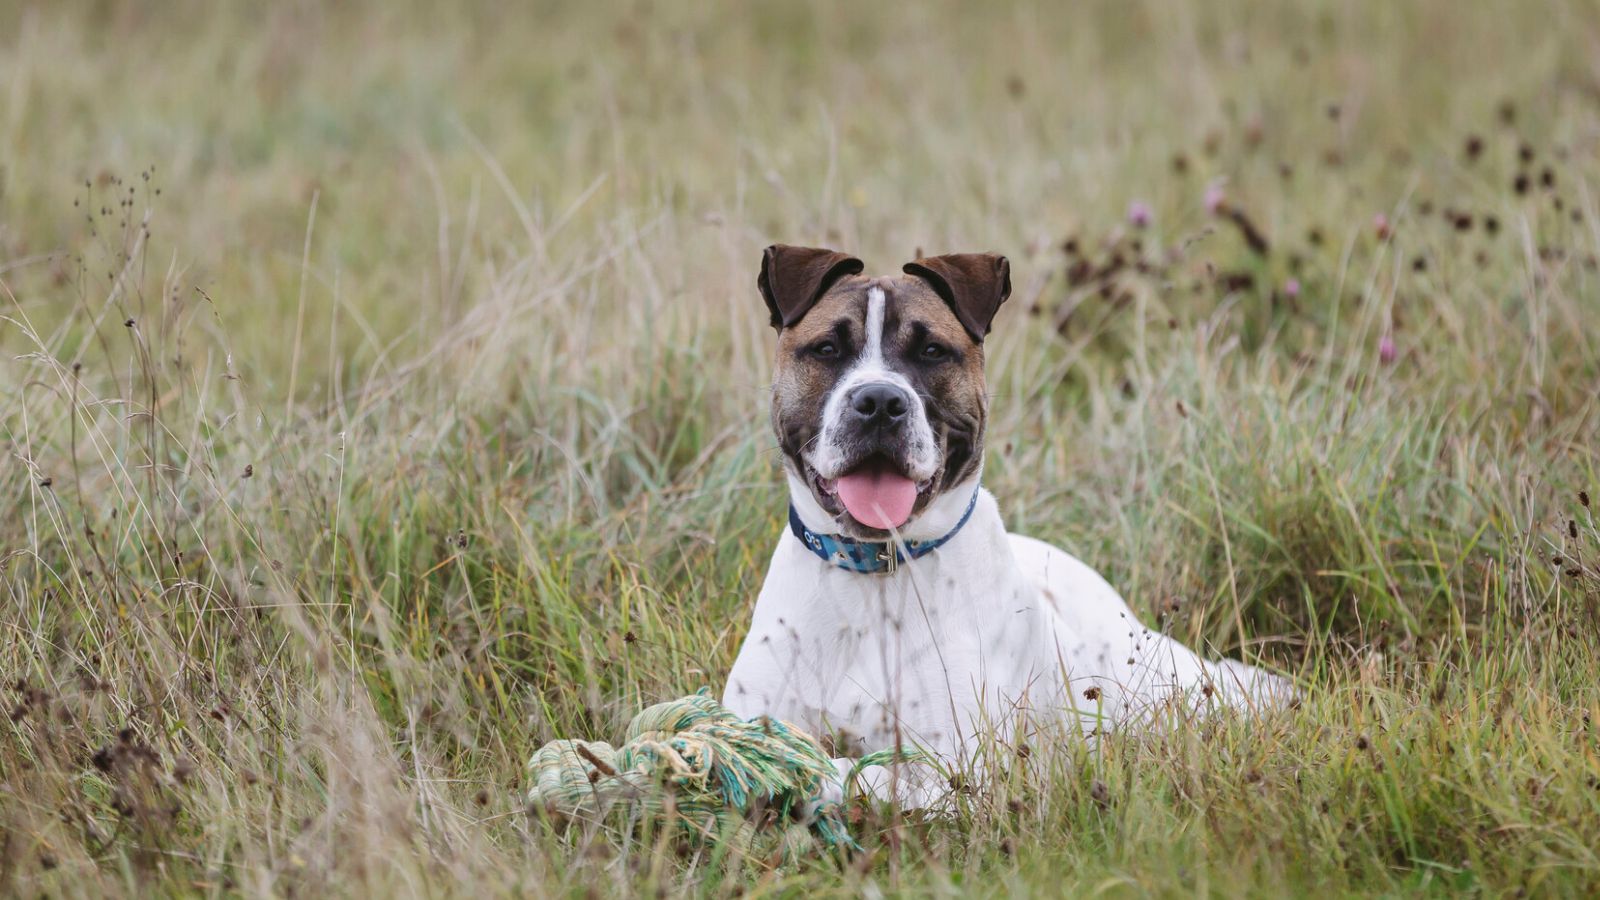 A brown and white bull breed dog lies in a field of long grass and looks towards the camera